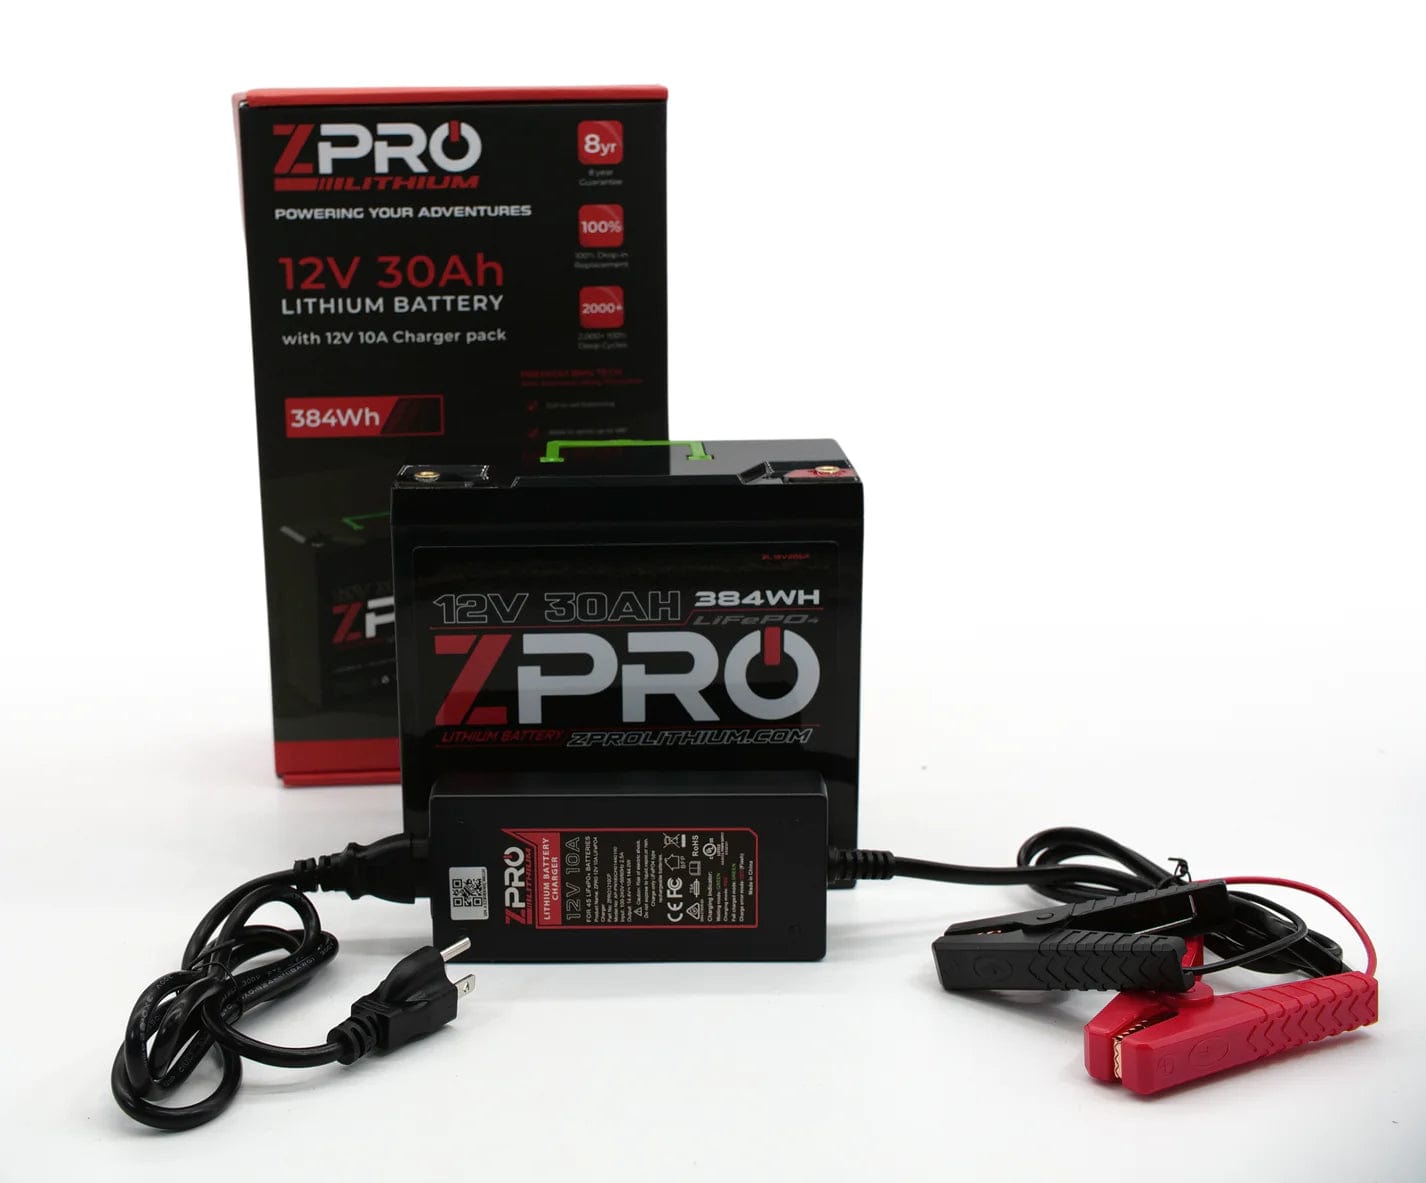 ZPro 12v 30ah Lithium Battery with Charger